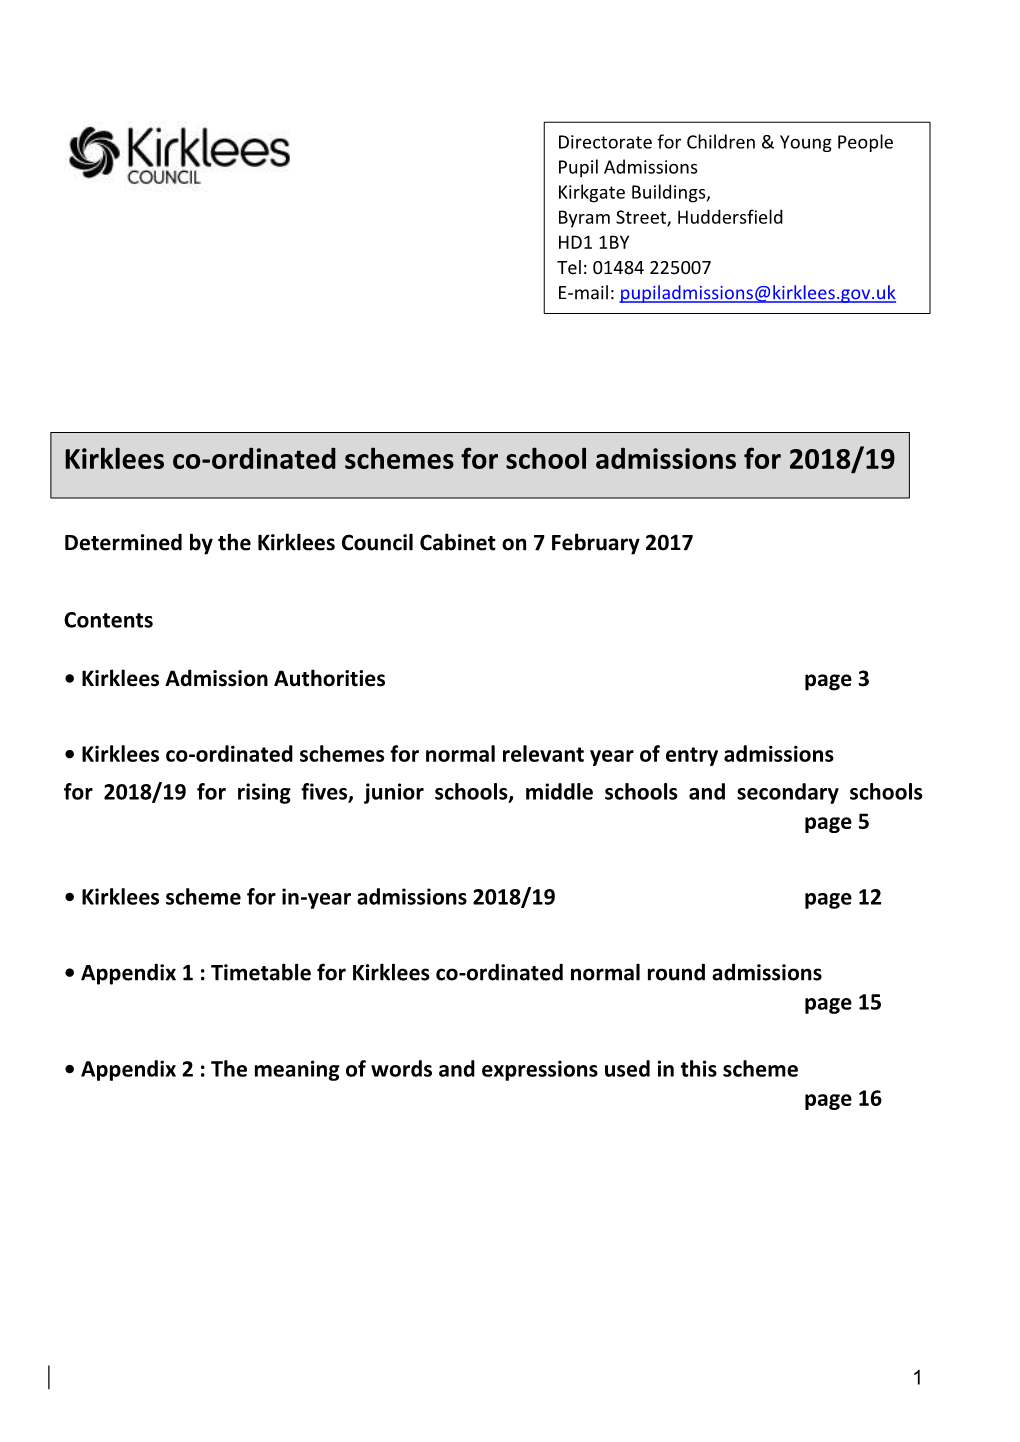 Kirklees Co-Ordinated Schemes for School Admissions for 2018/19